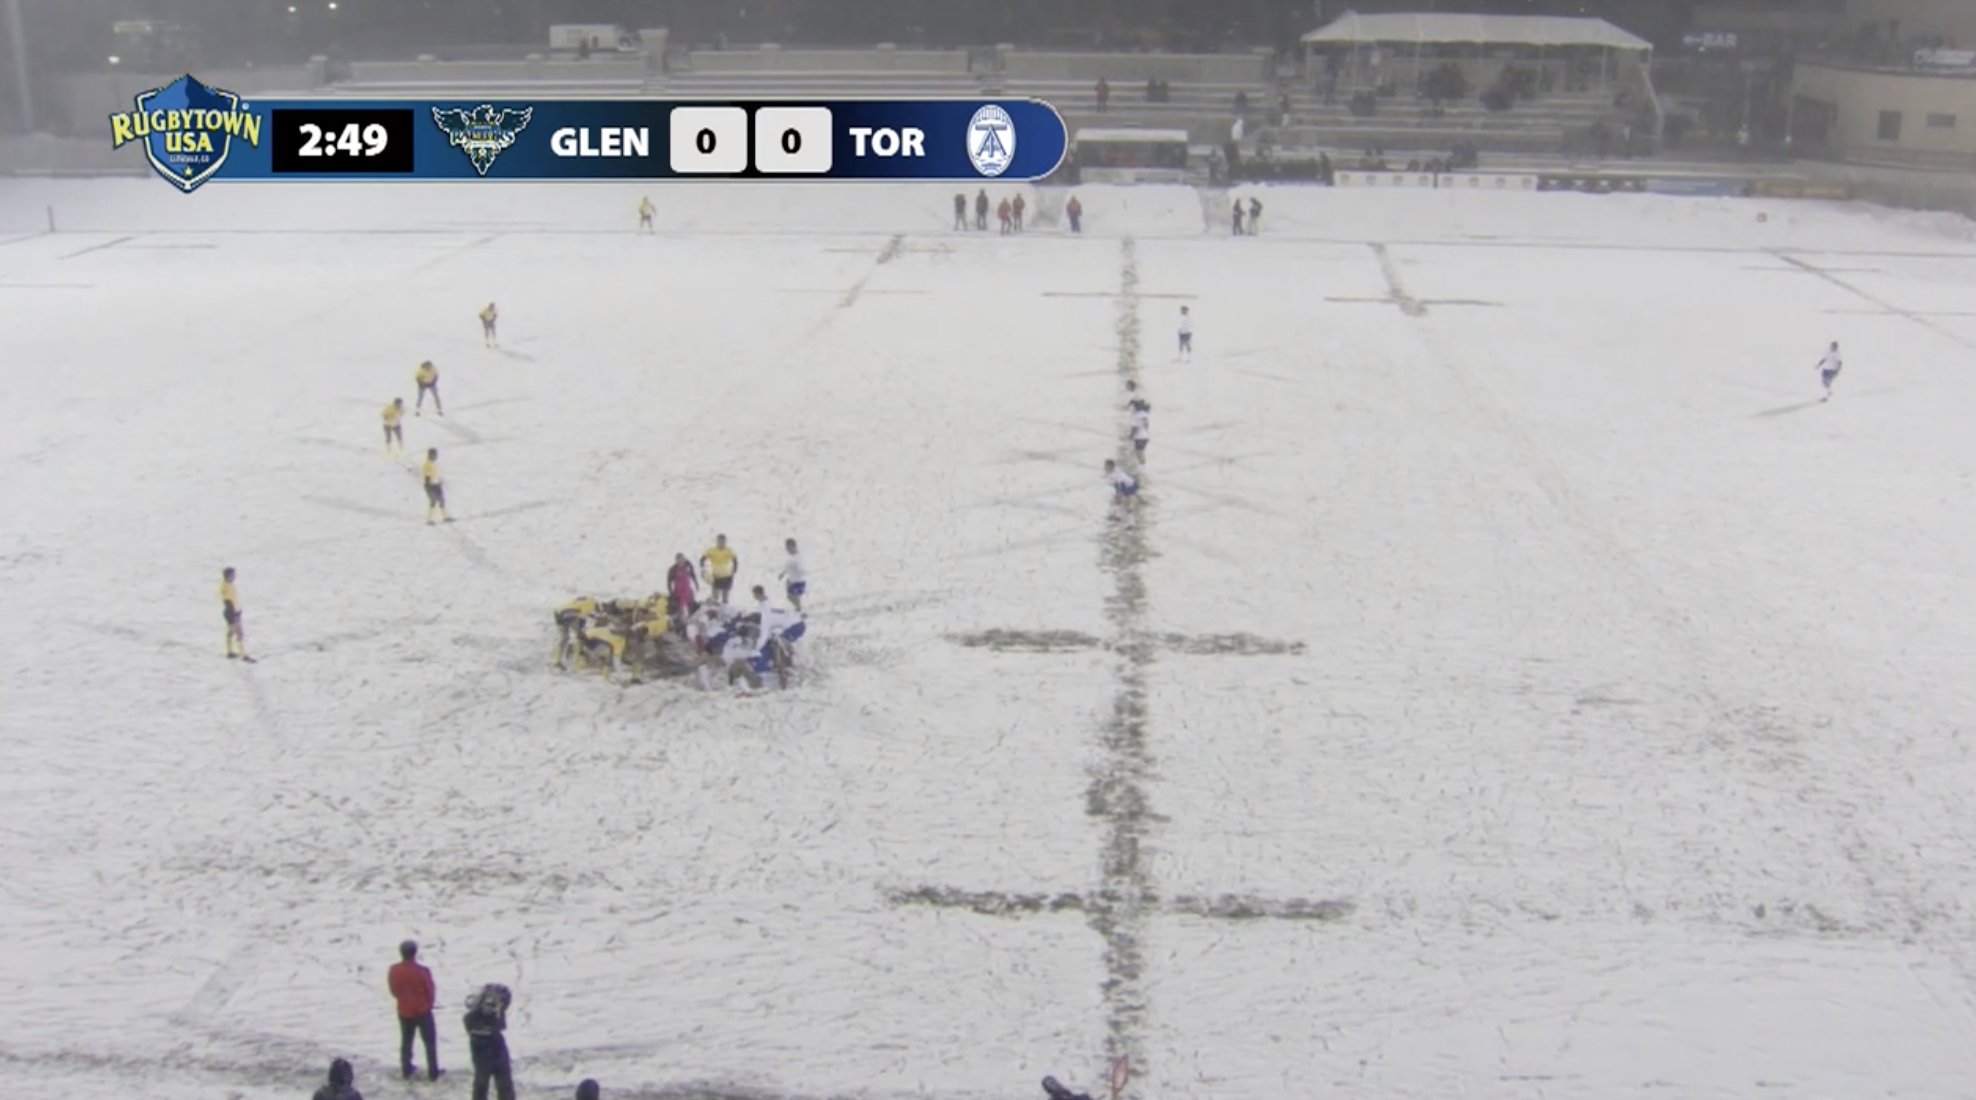 WATCH: MLR play in stupendous conditions following snow storm